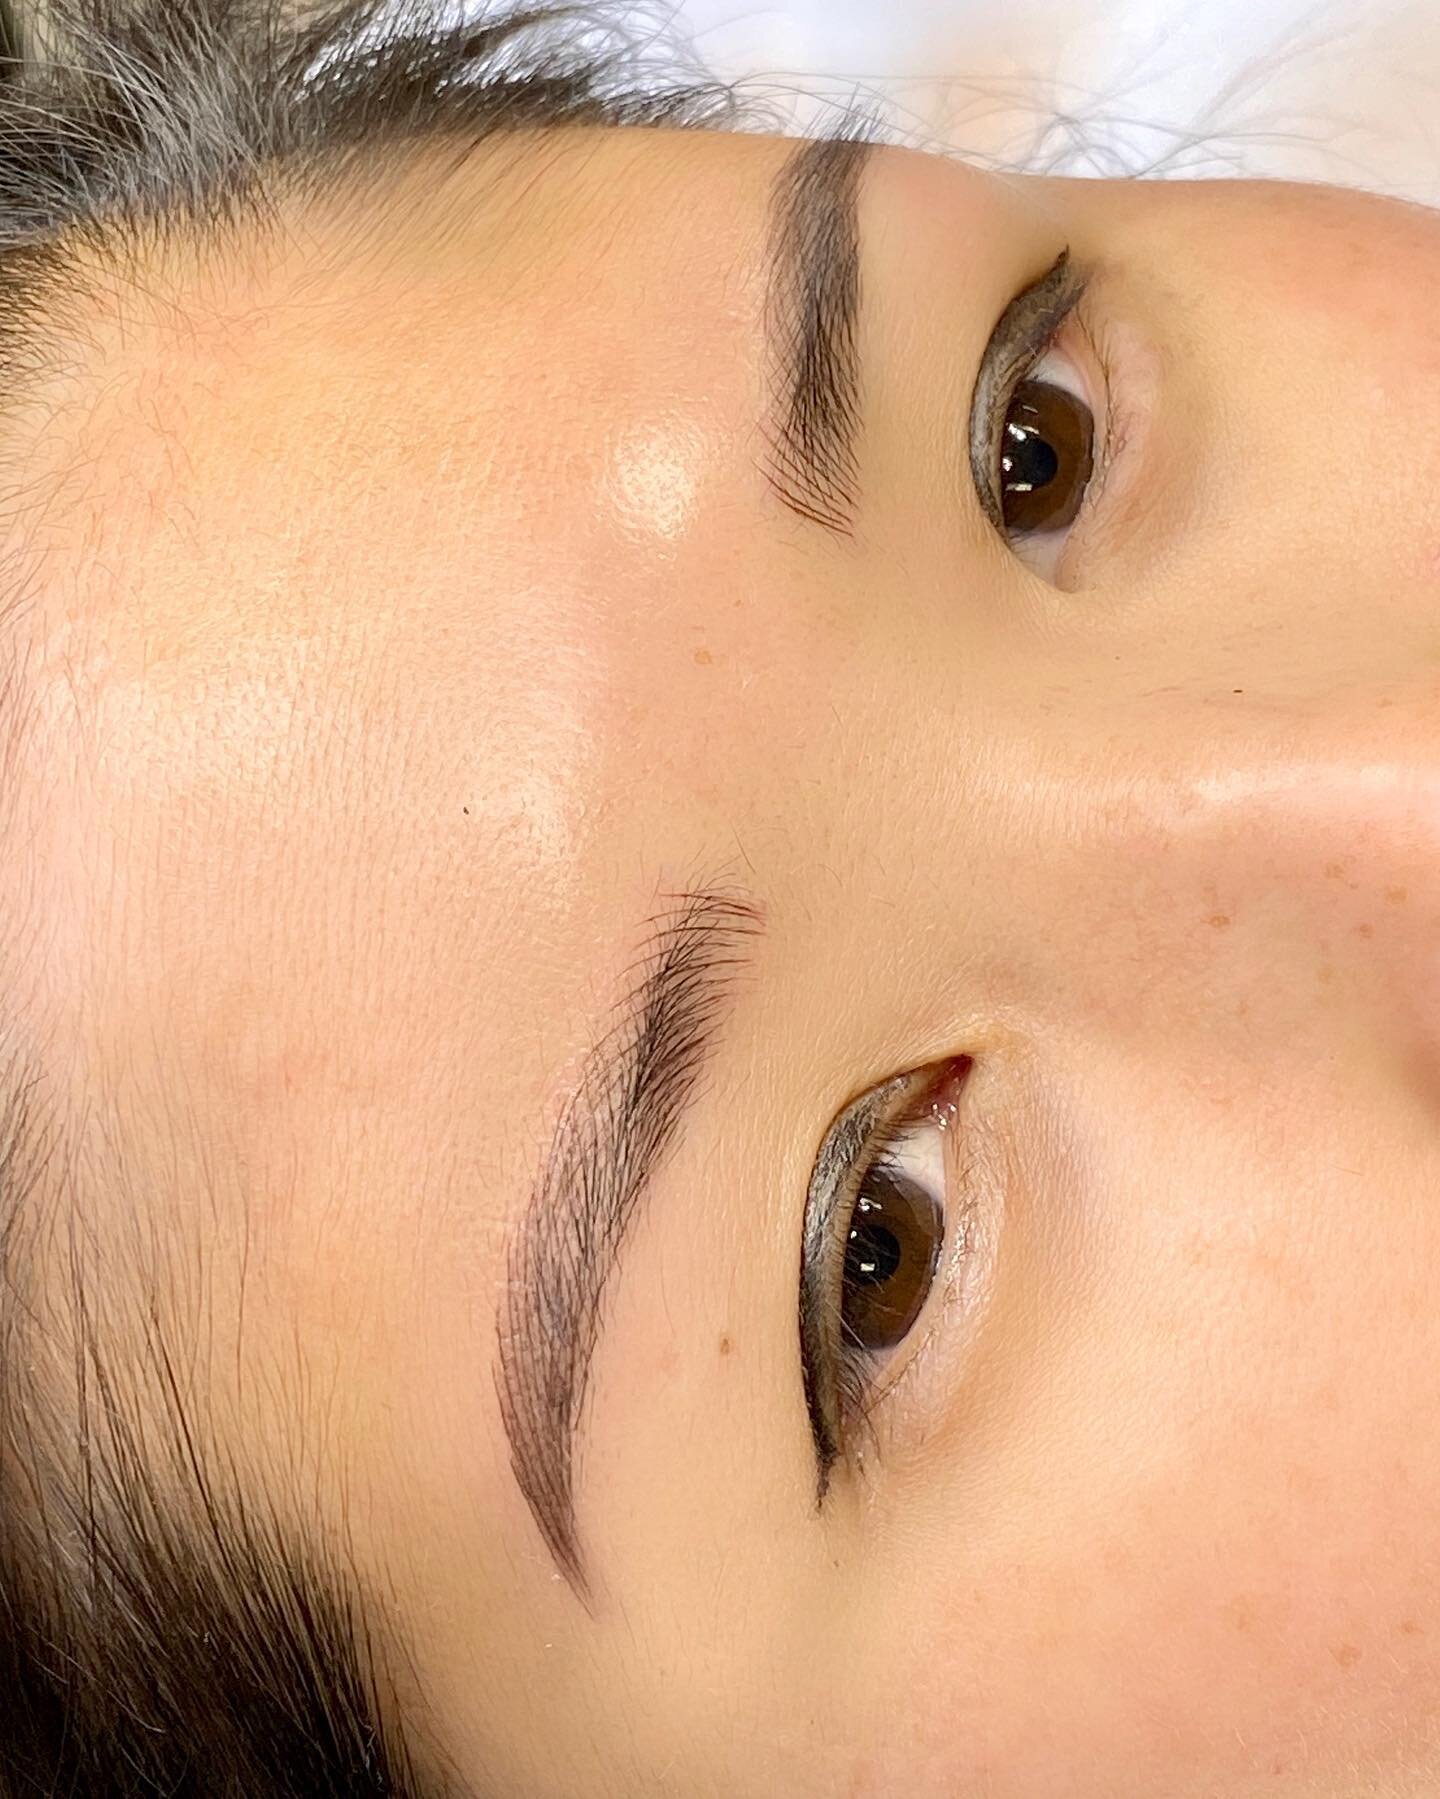 Lift her brows up a little bit with microblading and soft shading to give her natural looking brows #Microblading #shading #ombreshading #microshading #newbrows #happier #lifechanging #lovebrows #brow #brows #tattoobrows #browsonfleek #browshaping #b